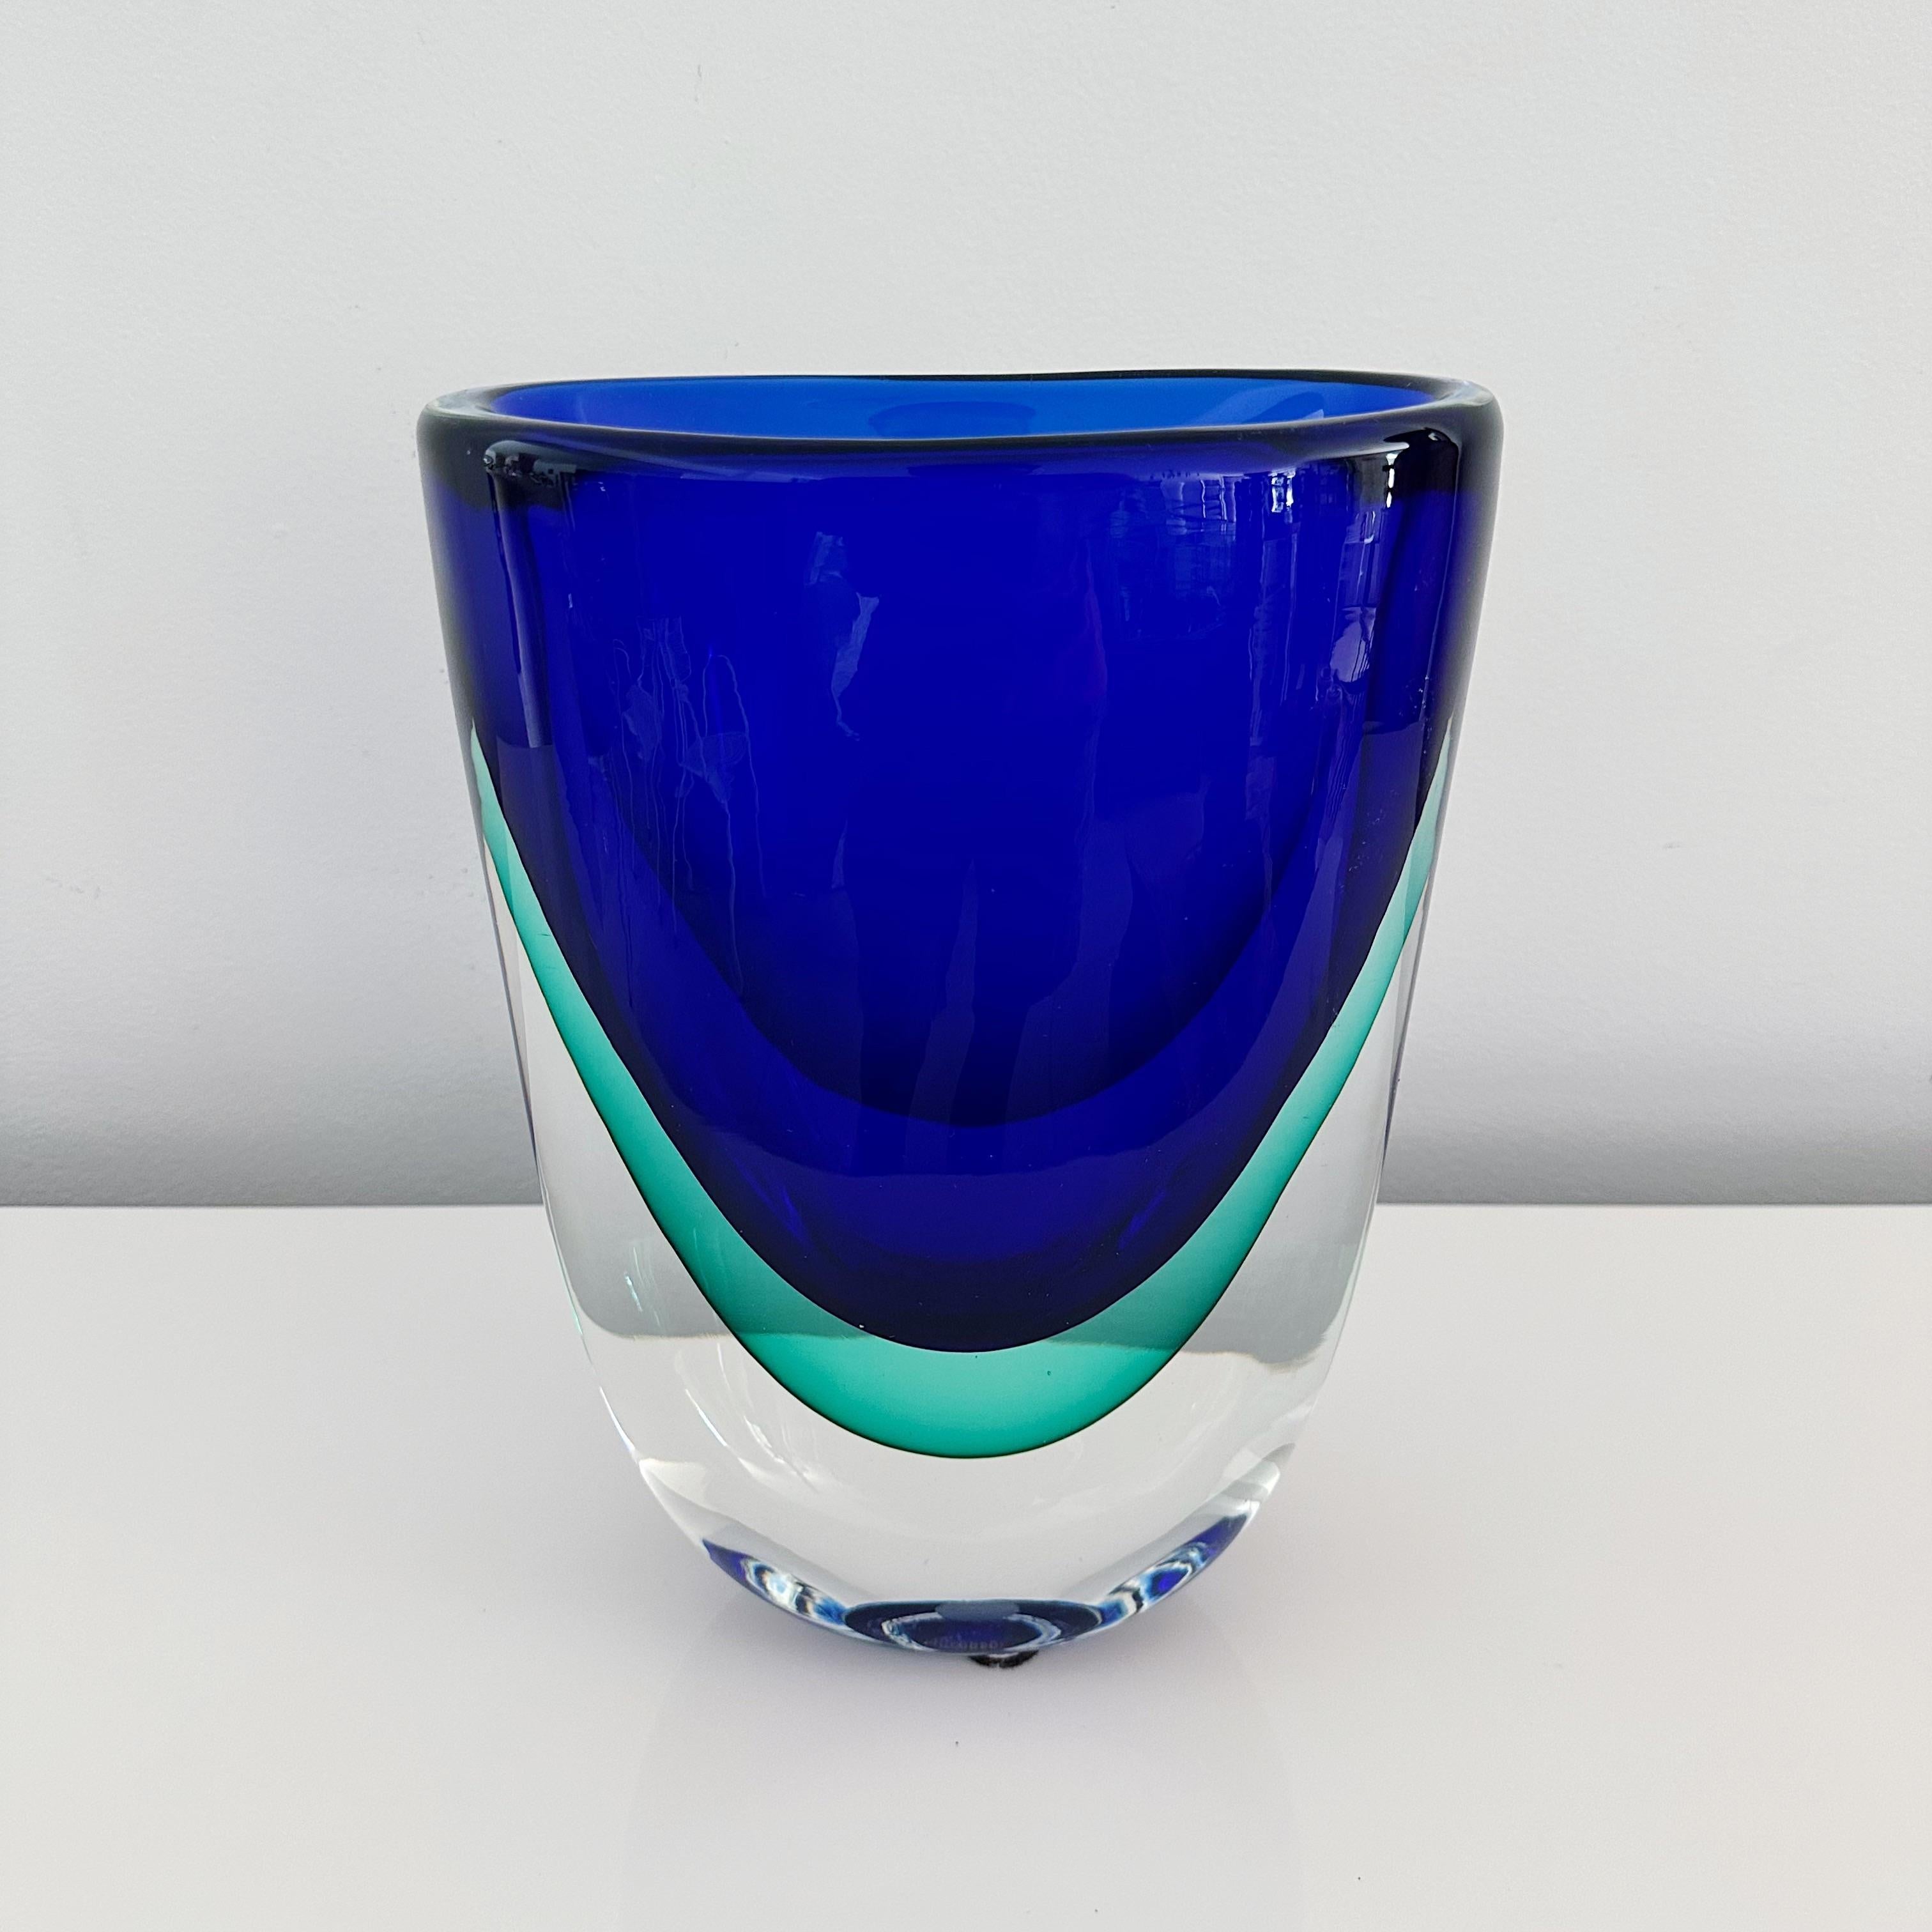 This rather large Murano vase, crafted in 2001, bears the signature of the master glass maker Stefano Toso on its underside. Showcasing the sommerso technique, with hues of cobalt blue, aqua blue, and clear glass. This particular piece is